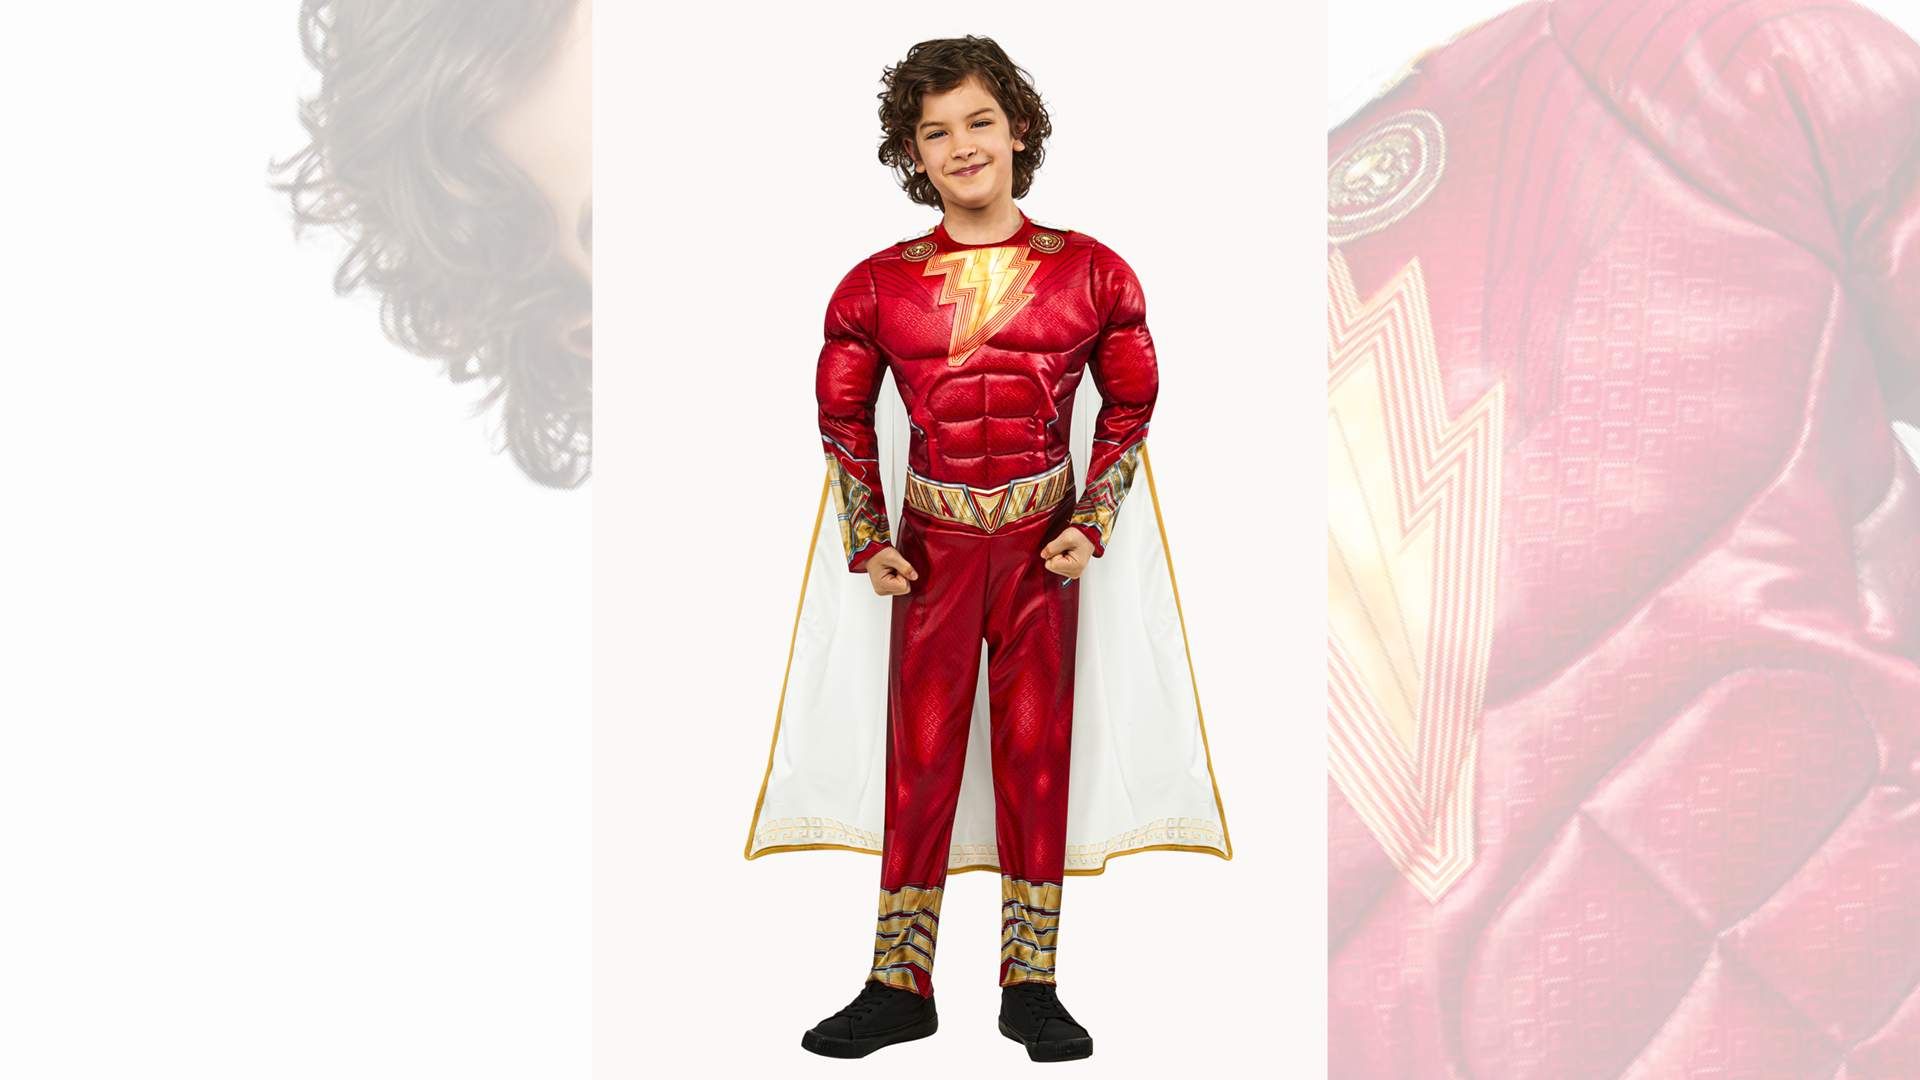 Warner Bros. Discovery and DC Announce 'Shazam' Merch